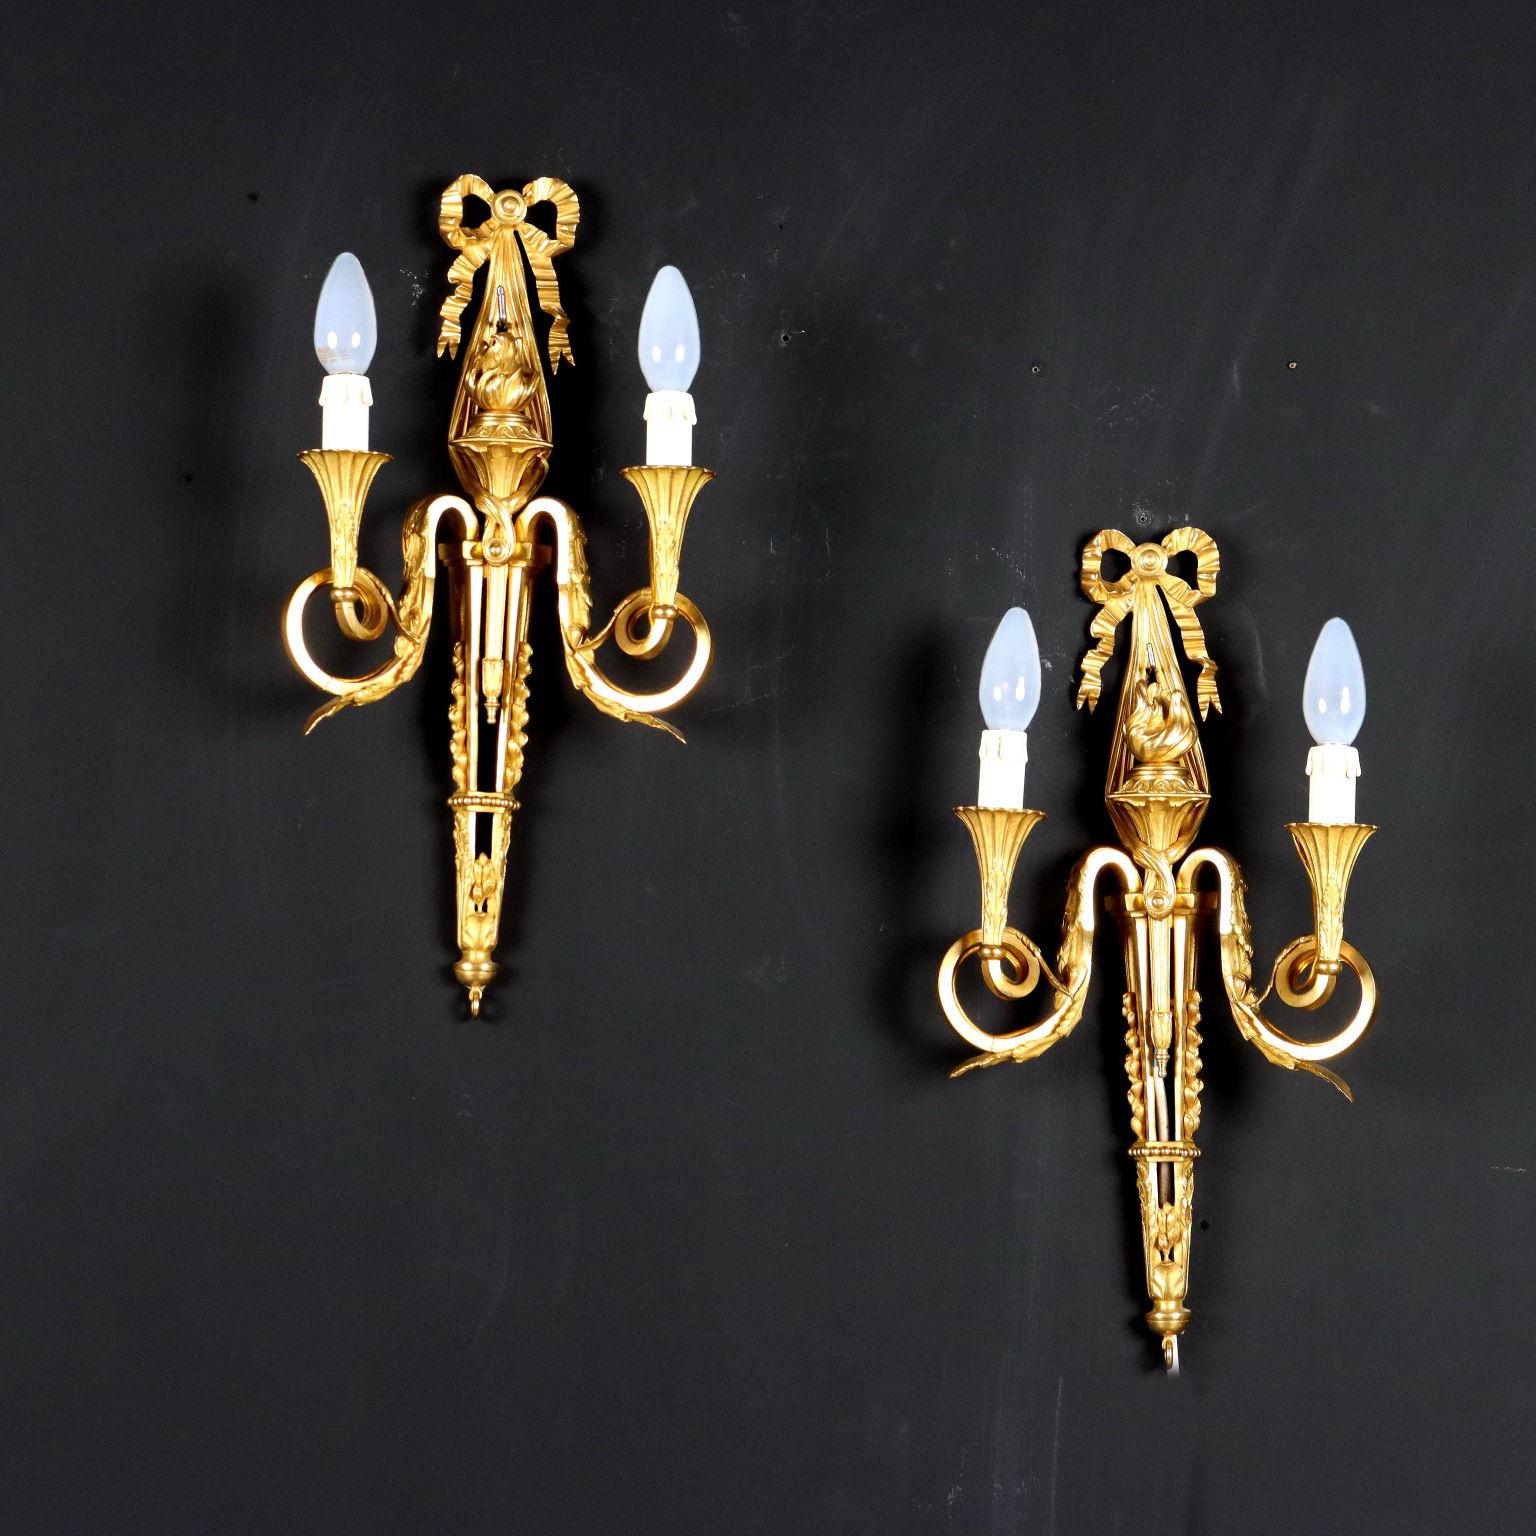 Pair of two-light wall sconces with gilded bronze frame. Central torch supported by a festoon culminating in a love knot and stopped by galls. Italy 20th century.